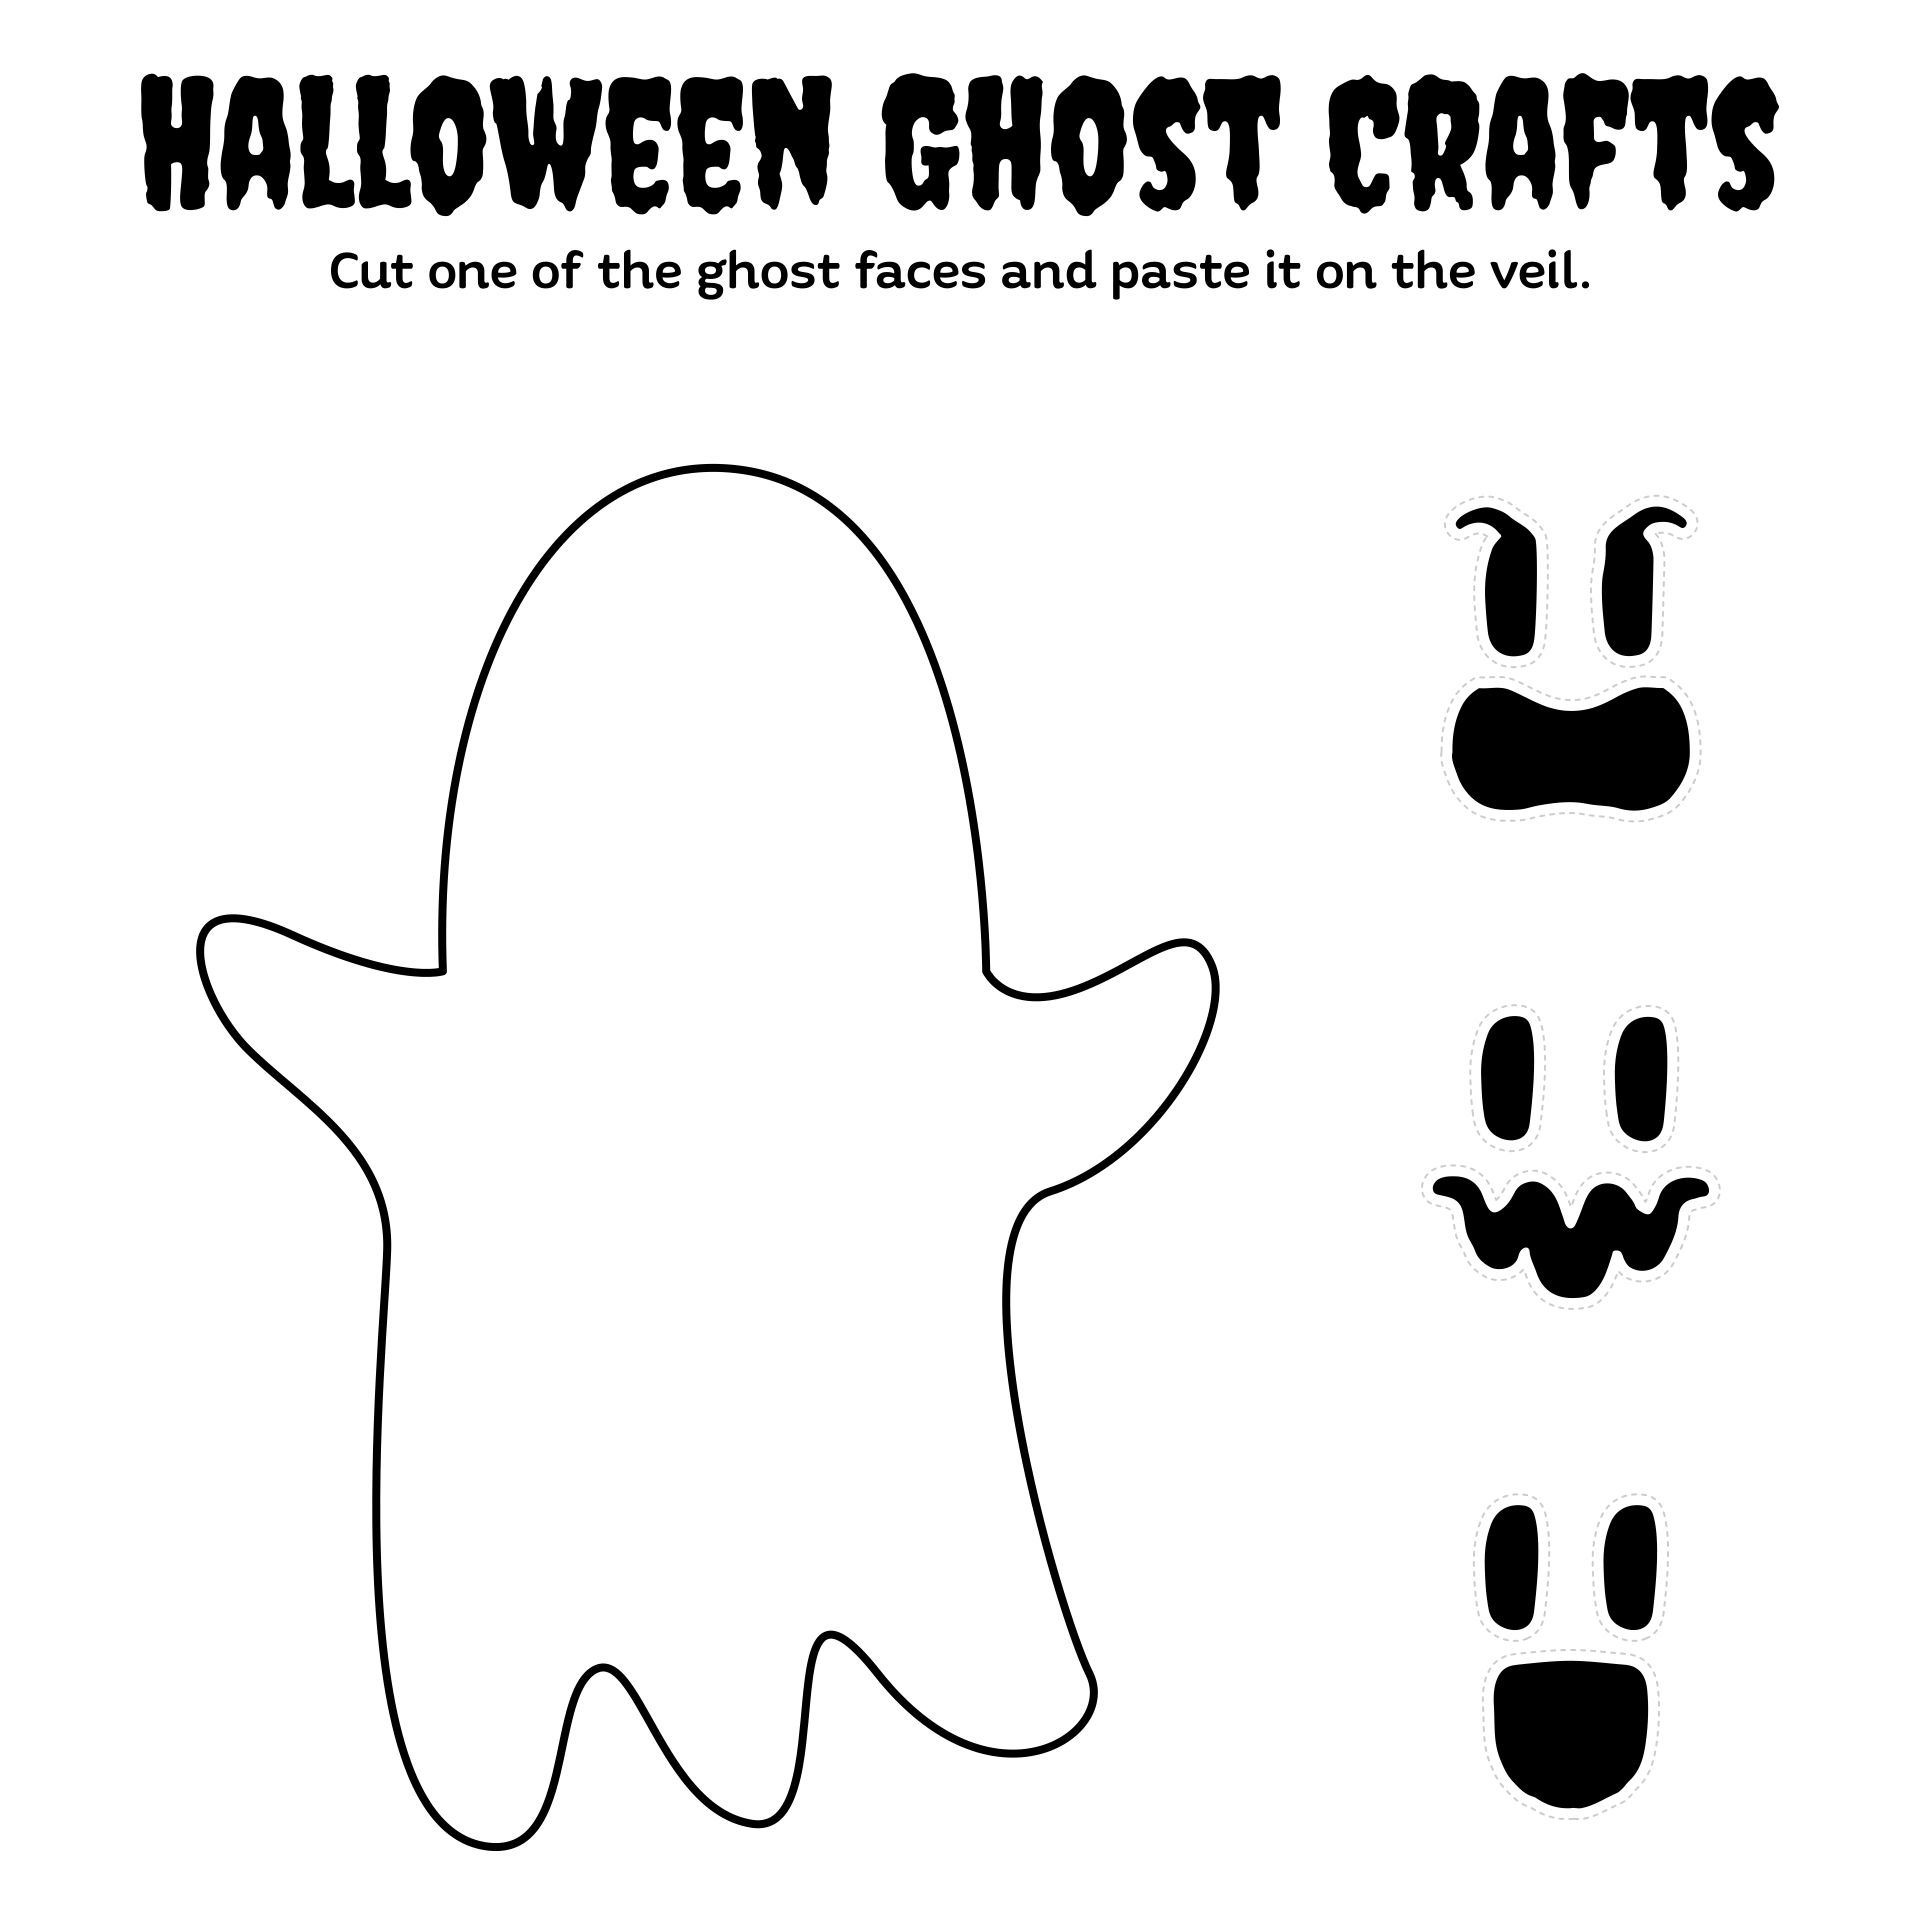 Non-Spooky Halloween Ghost Crafts For Kids Printable